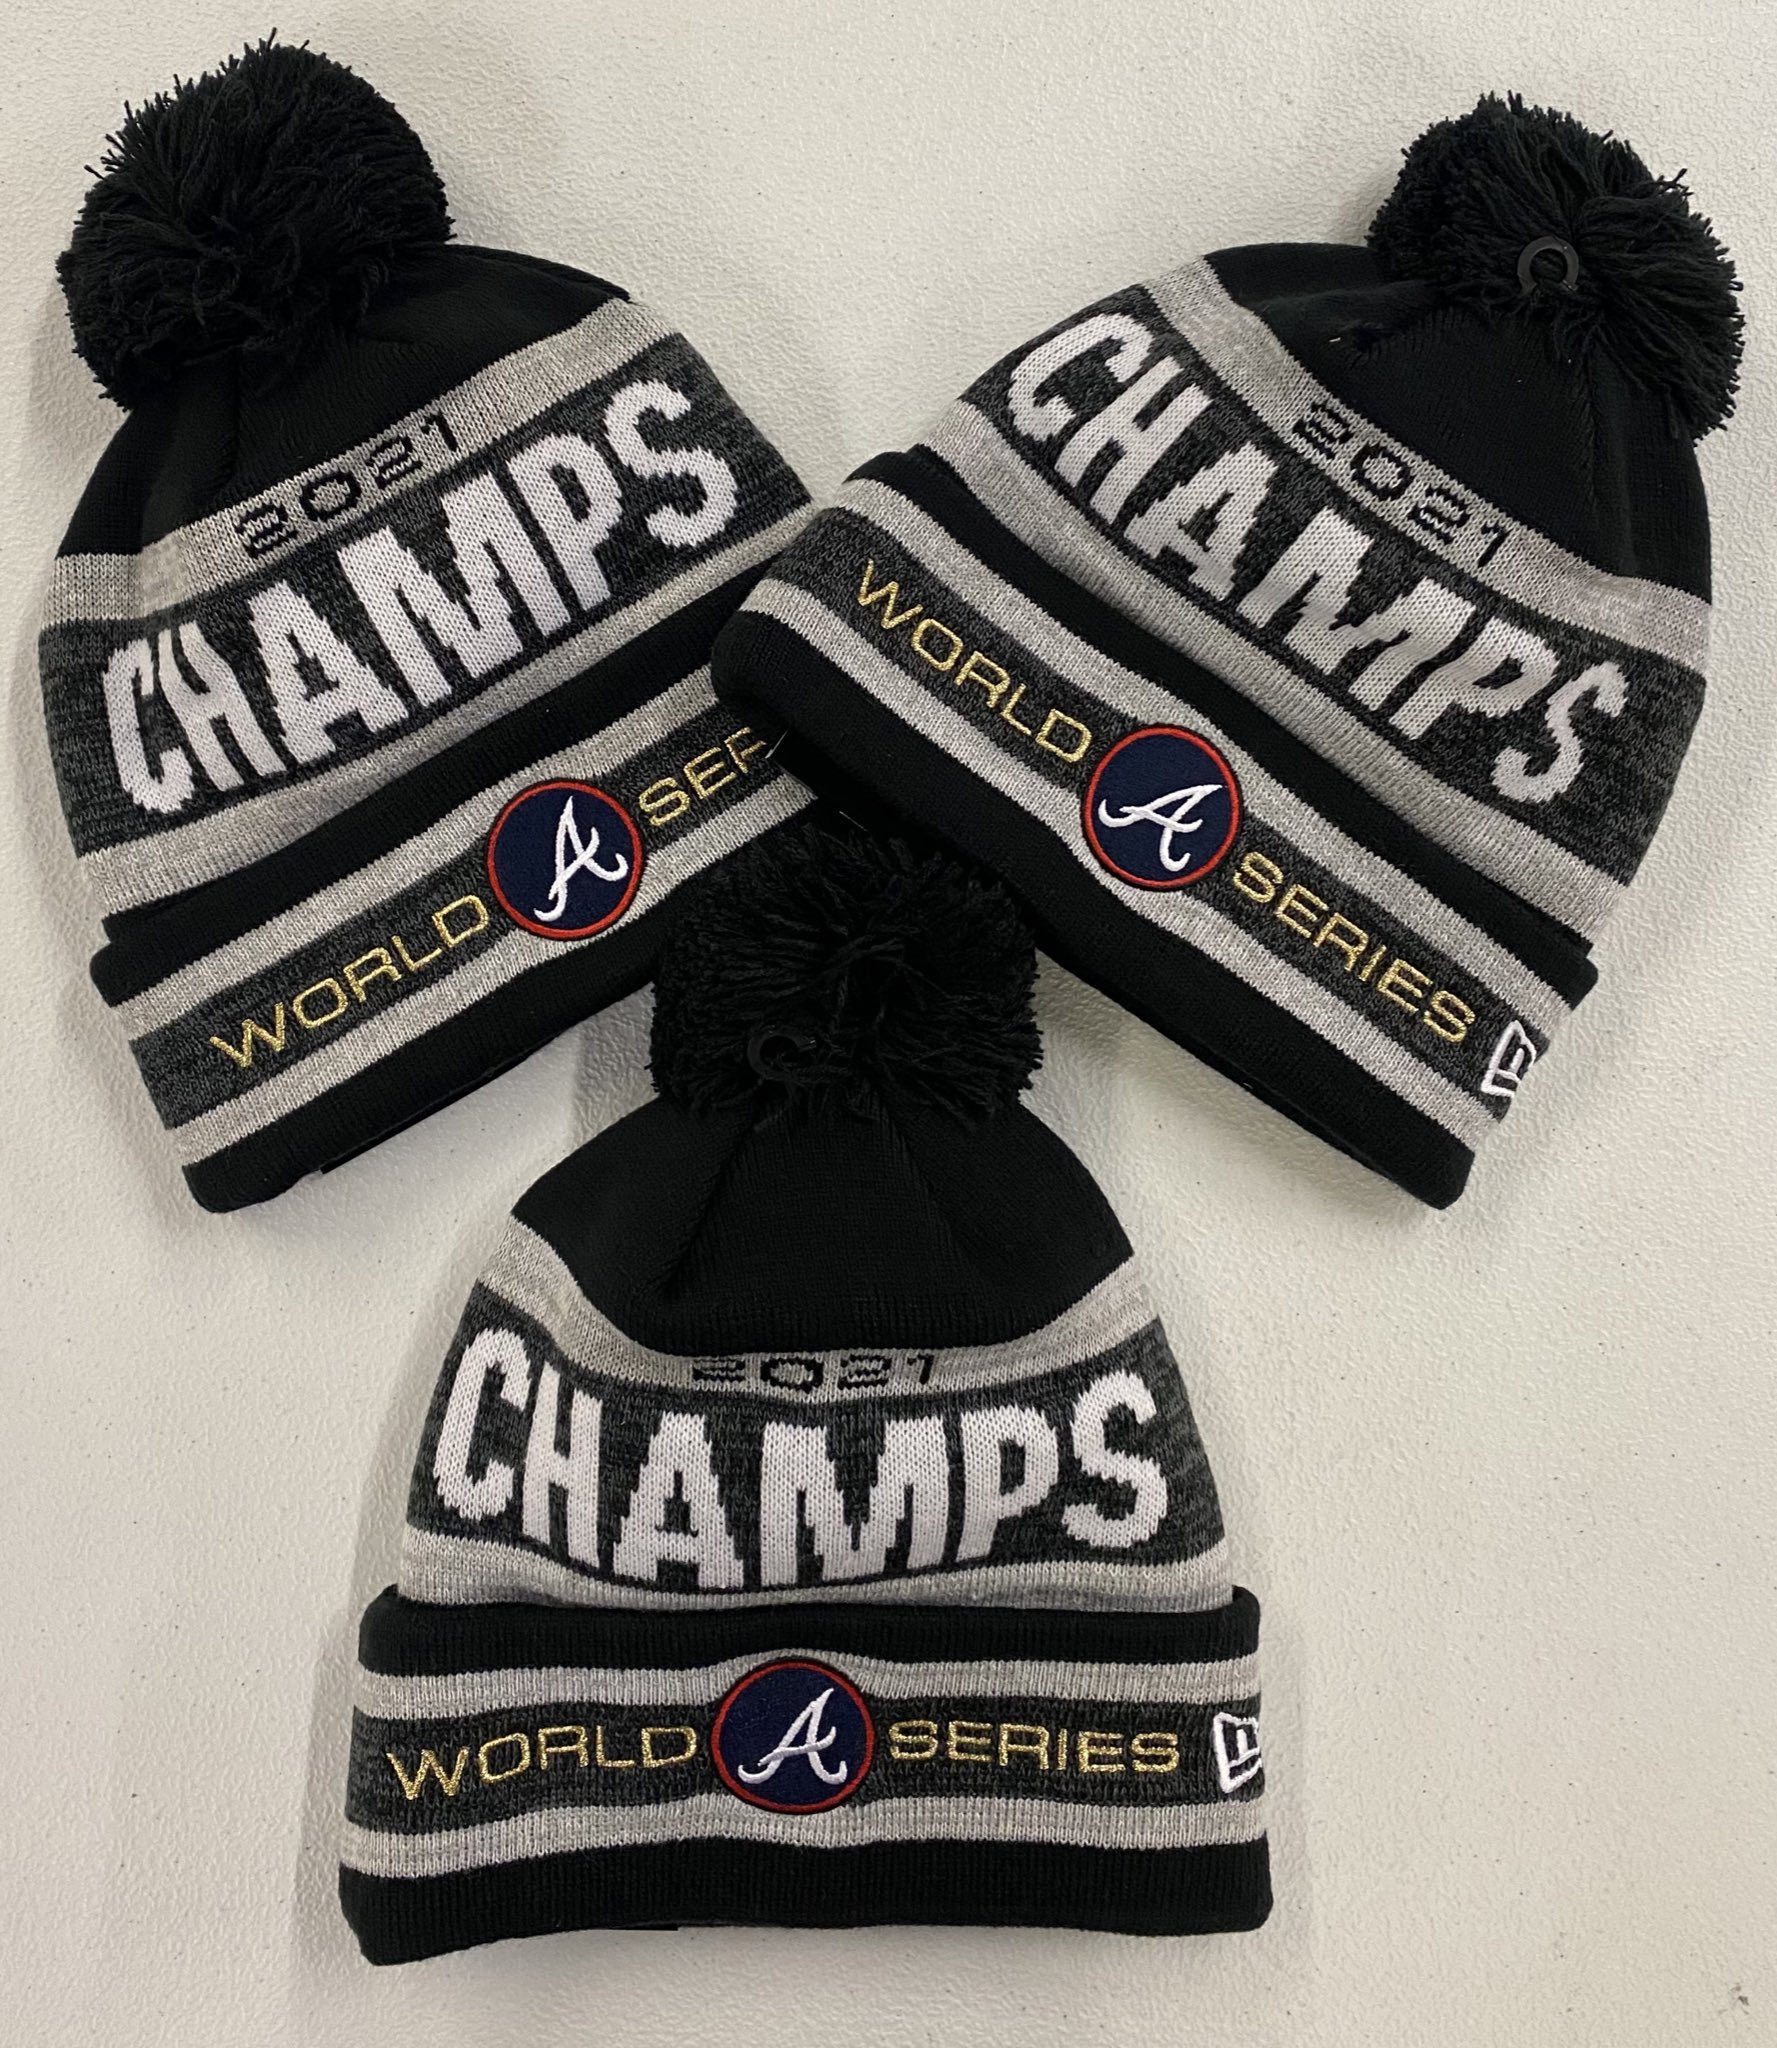 Braves Retail on X: SURPRISE! A limited supply of WS Champs